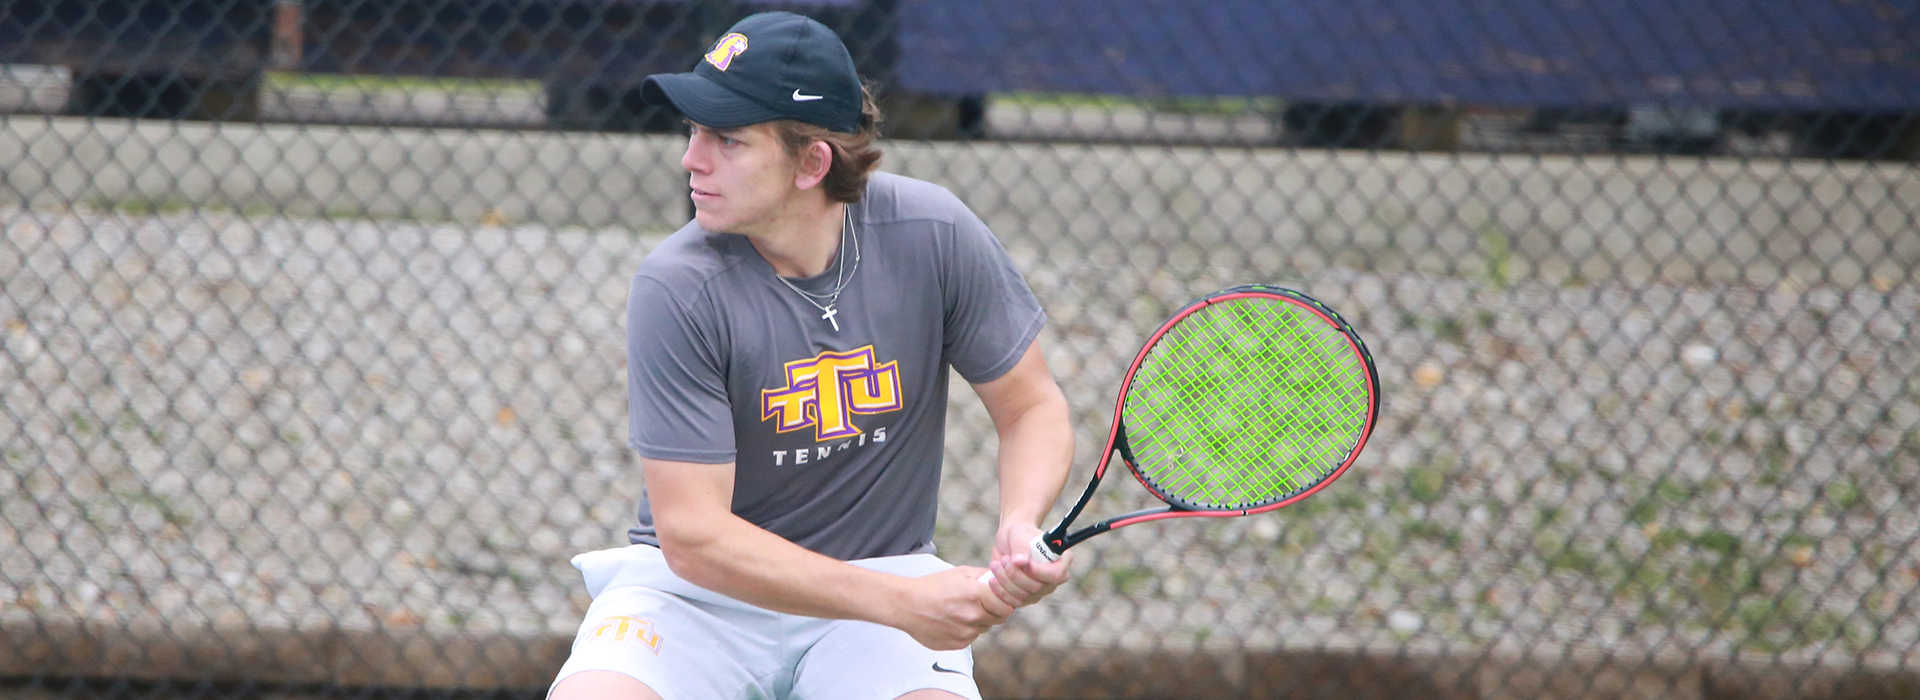 Tech tennis falls at Alabama to wrap up busy weekend of action